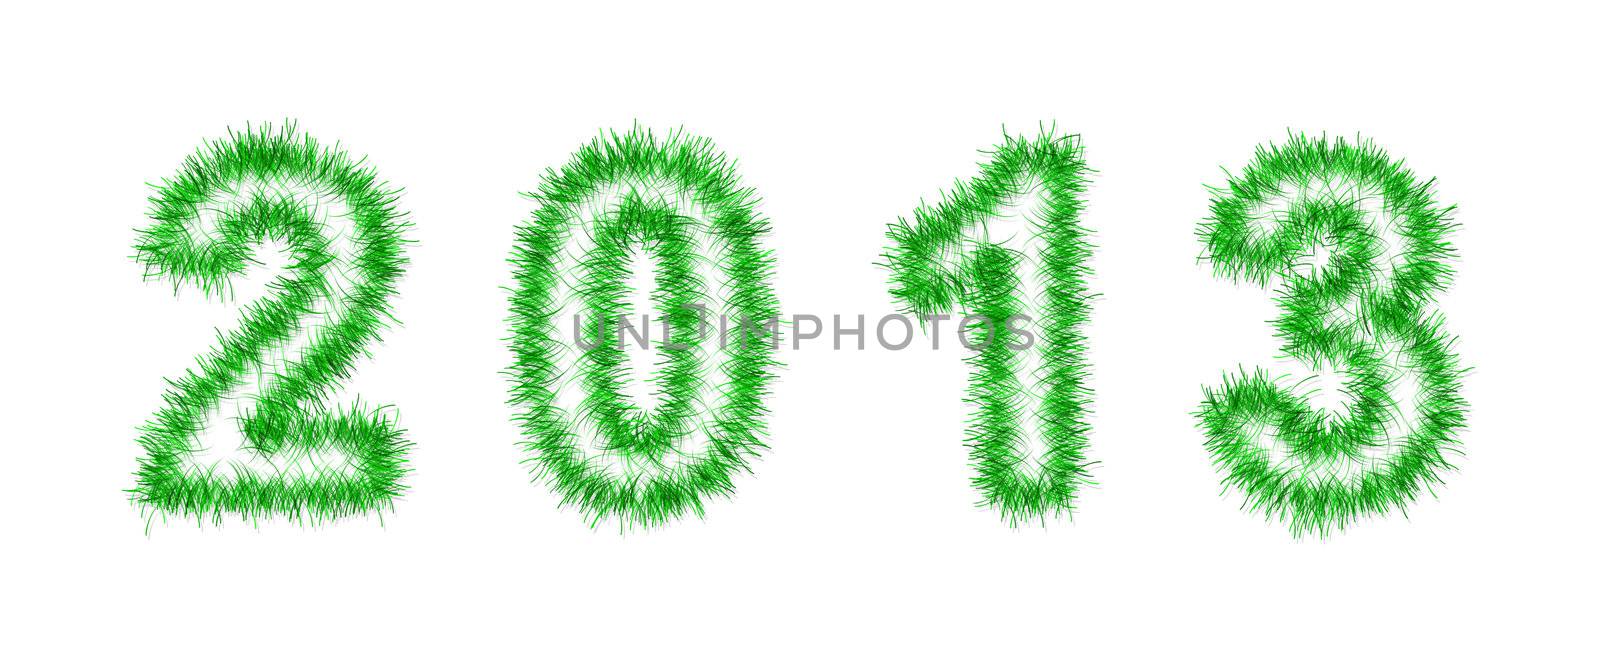 green tinsel forming 2013 year number on white